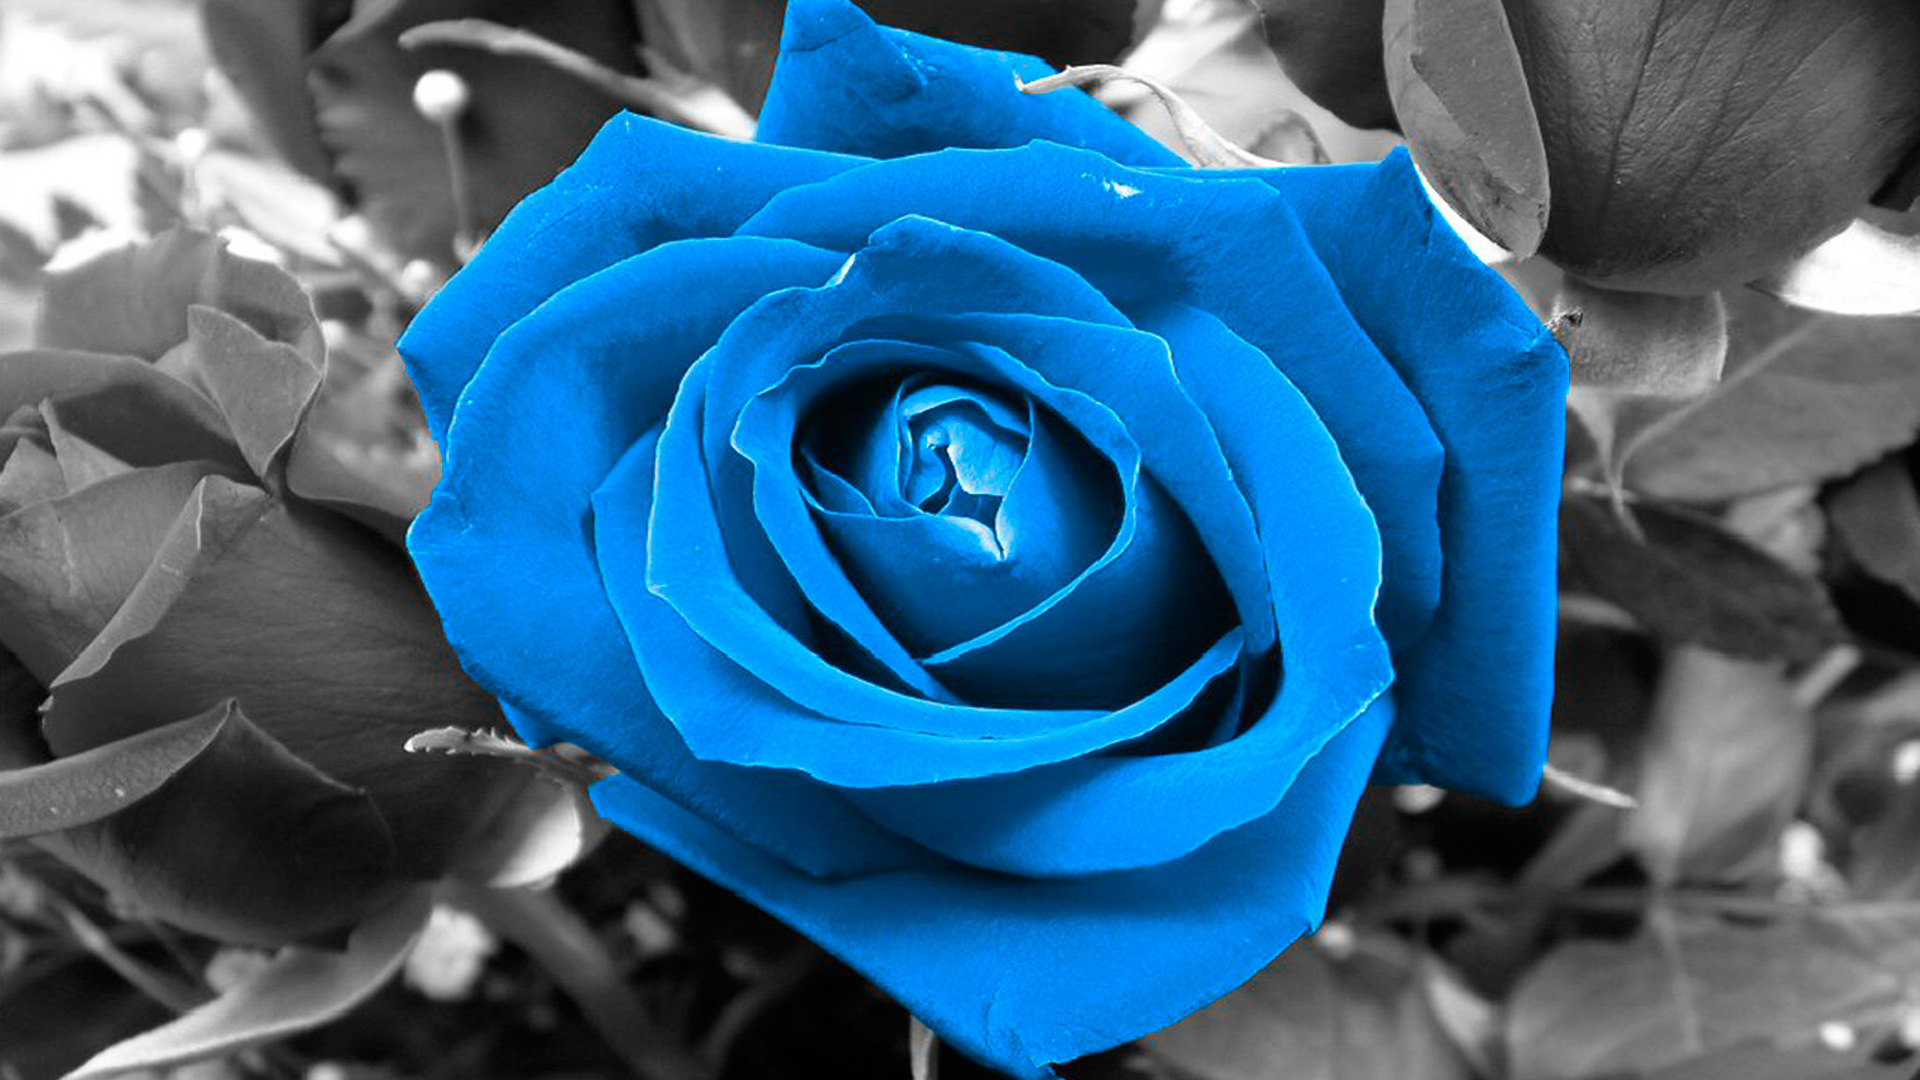 Blue Rose On Black And White Background Wallpaper Image